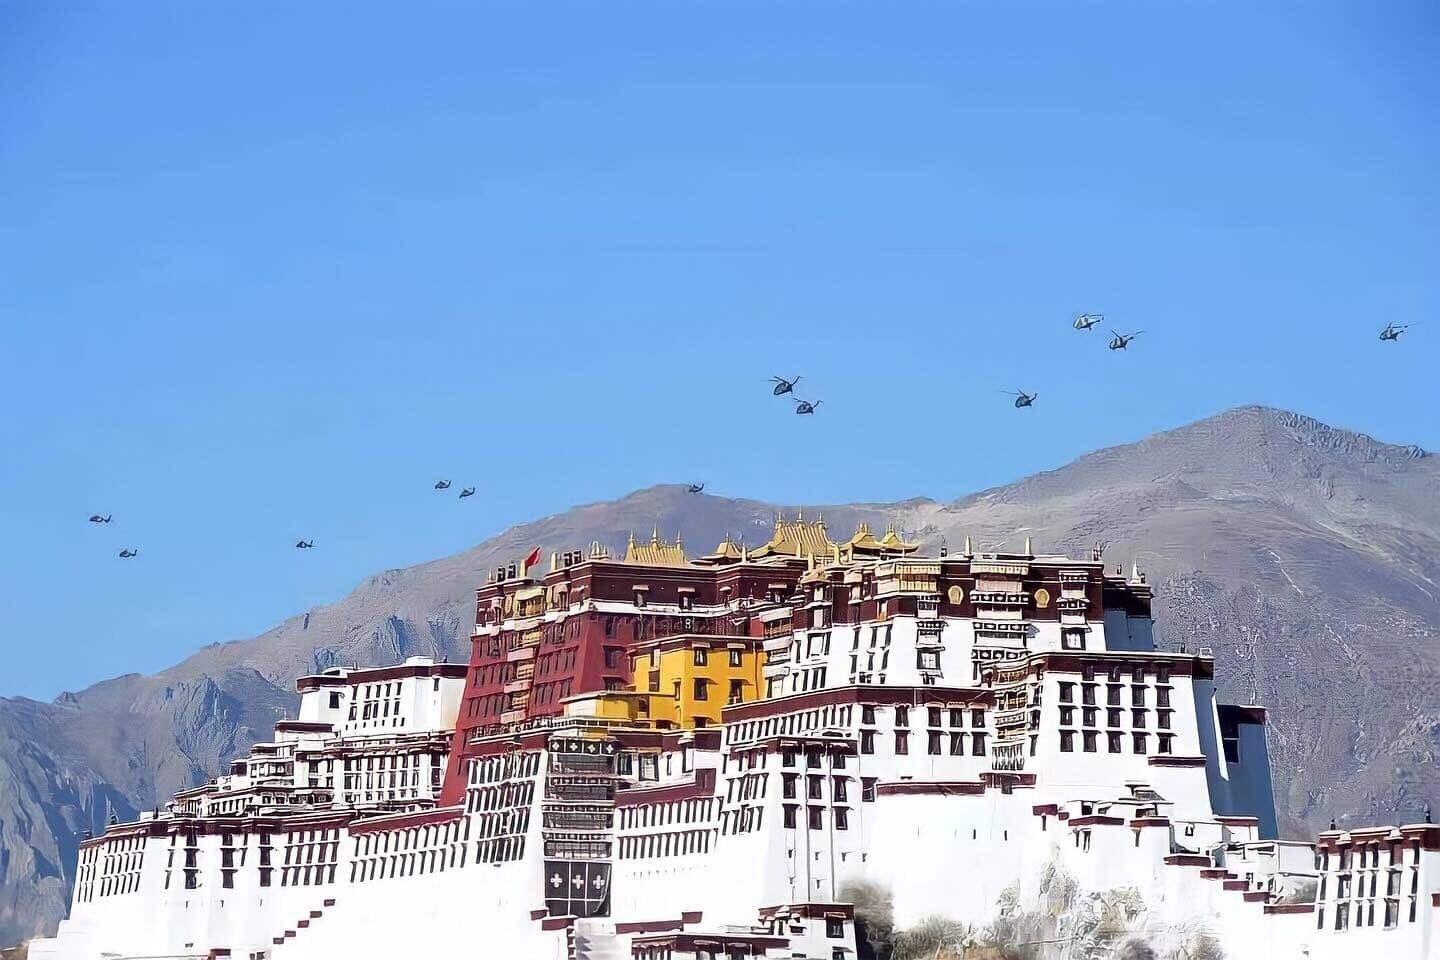 Choppers over Potala Palace, Lhasa